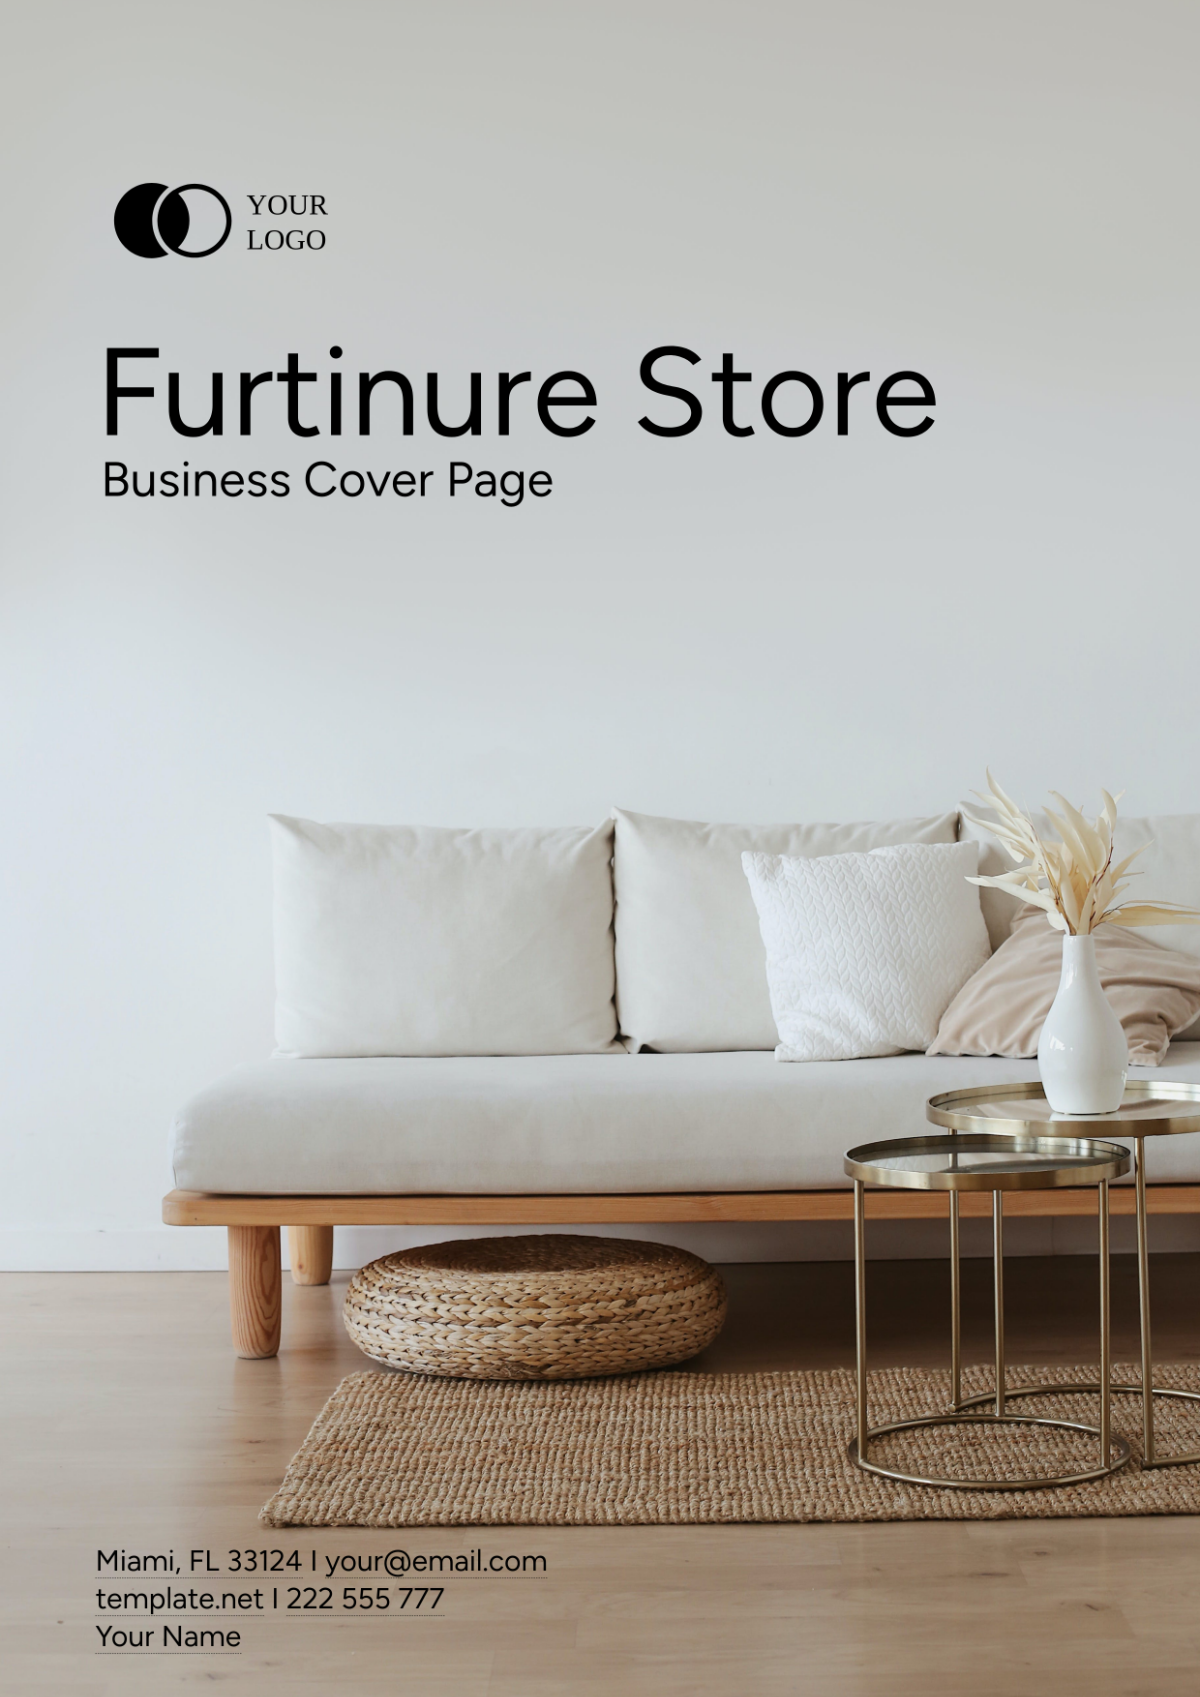 Furniture Store Business Cover Page